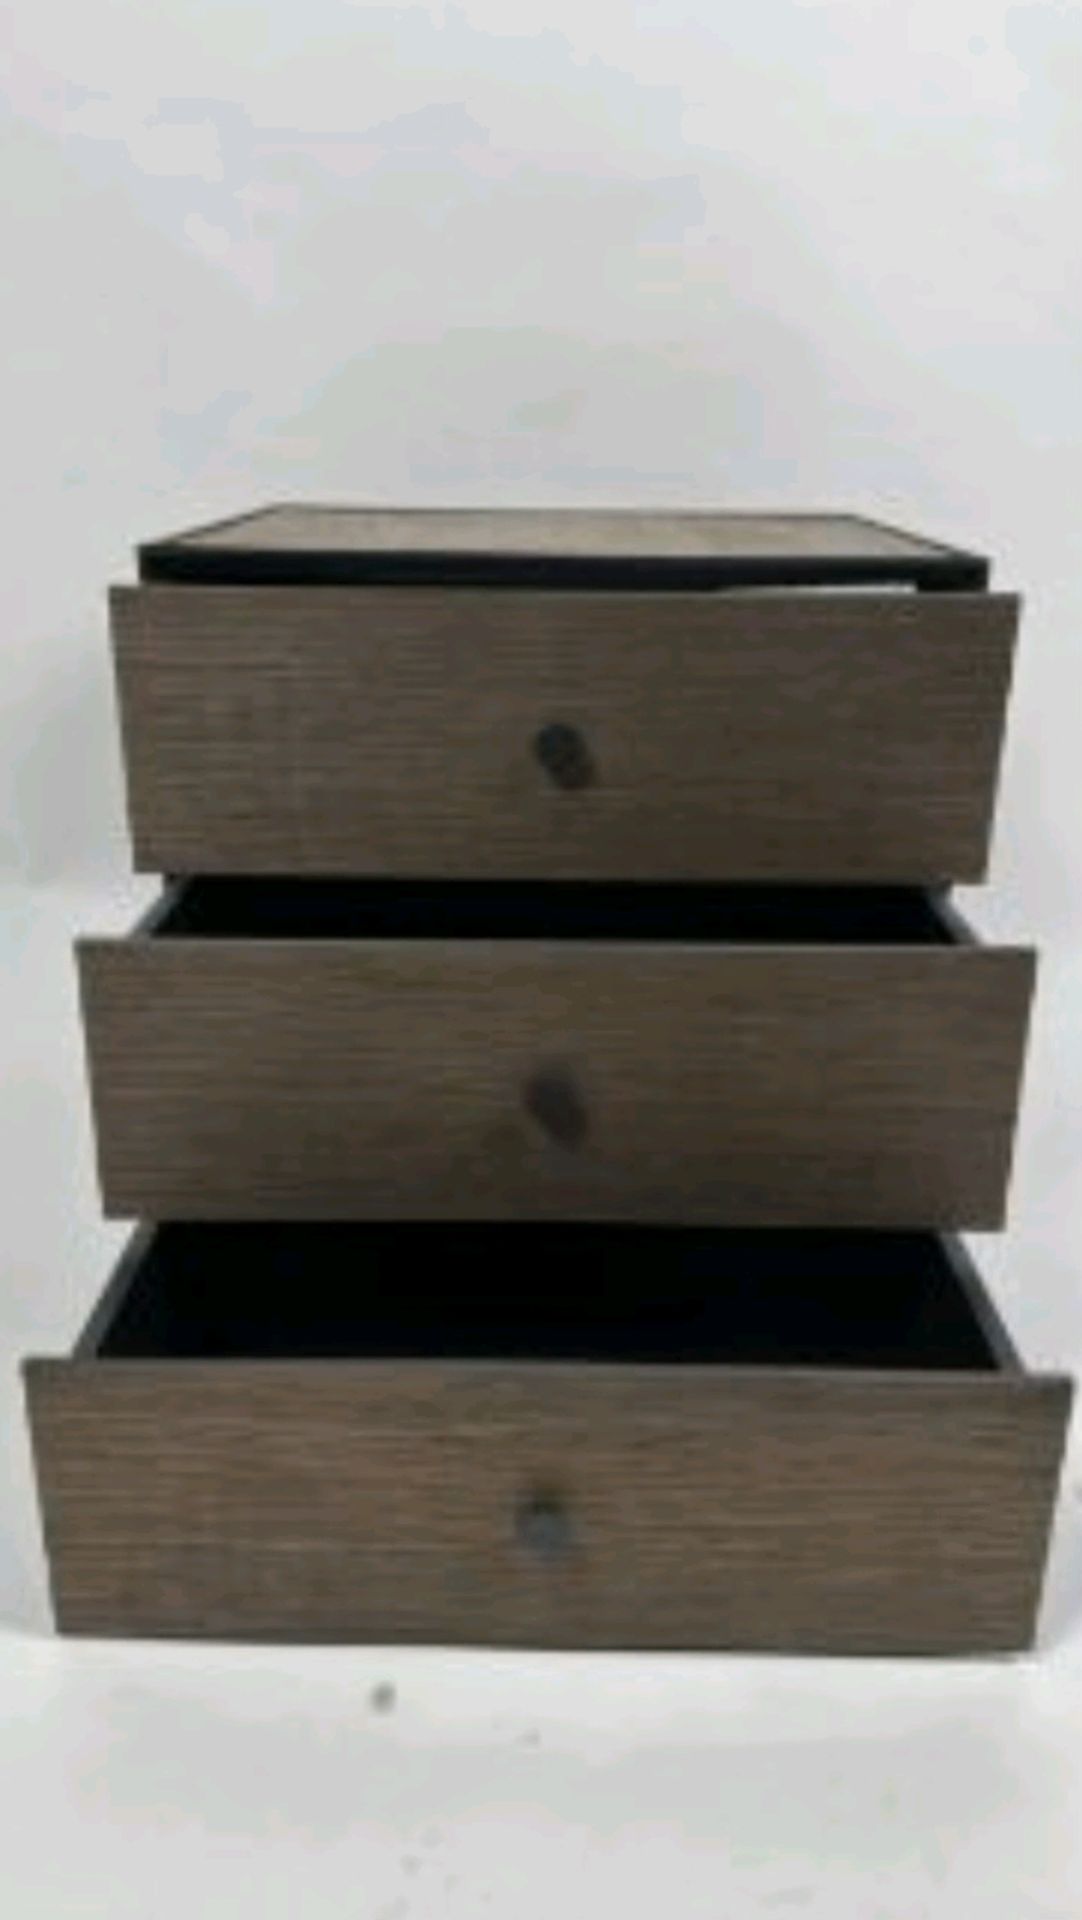 49 Smoked Oak Frame Box with 3 Drawers by Lassen - Image 3 of 4